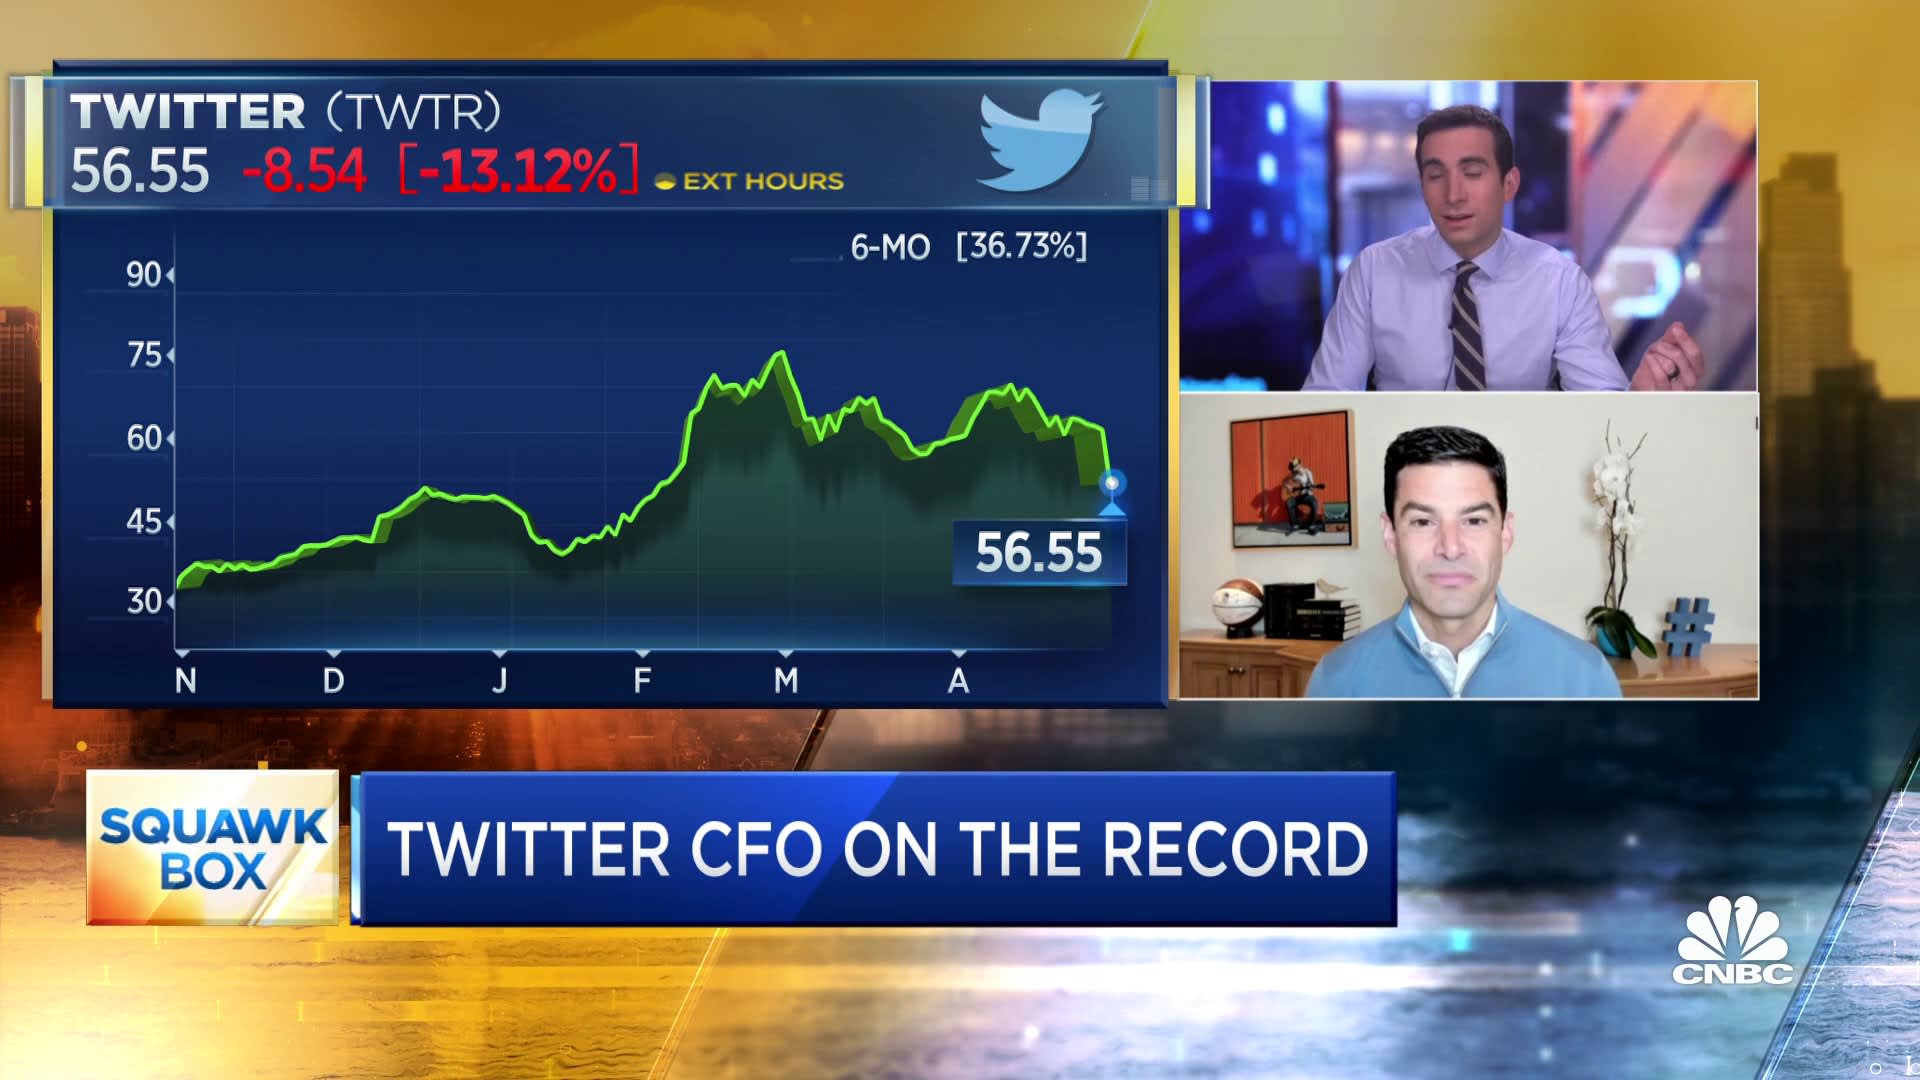 Twitter CFO on Q1 earnings results, user growth, outlook and more